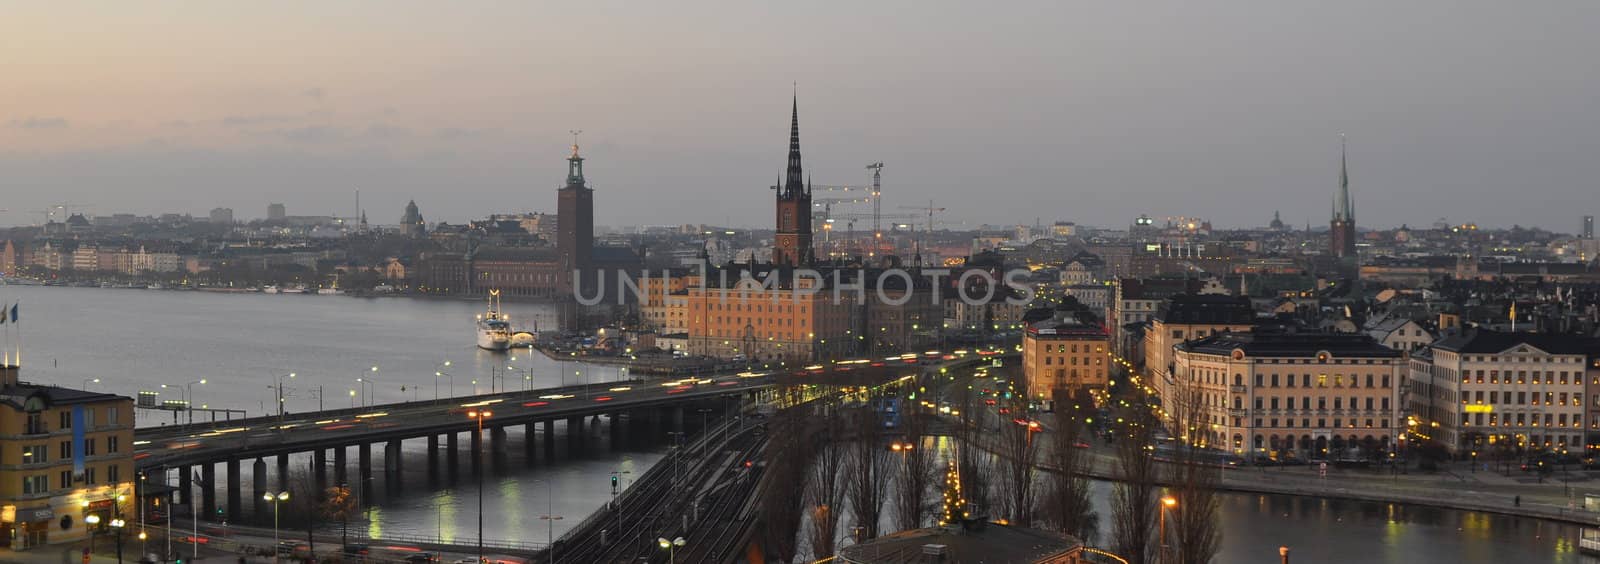 View over Stockholm from Katarinahissen during dusk.